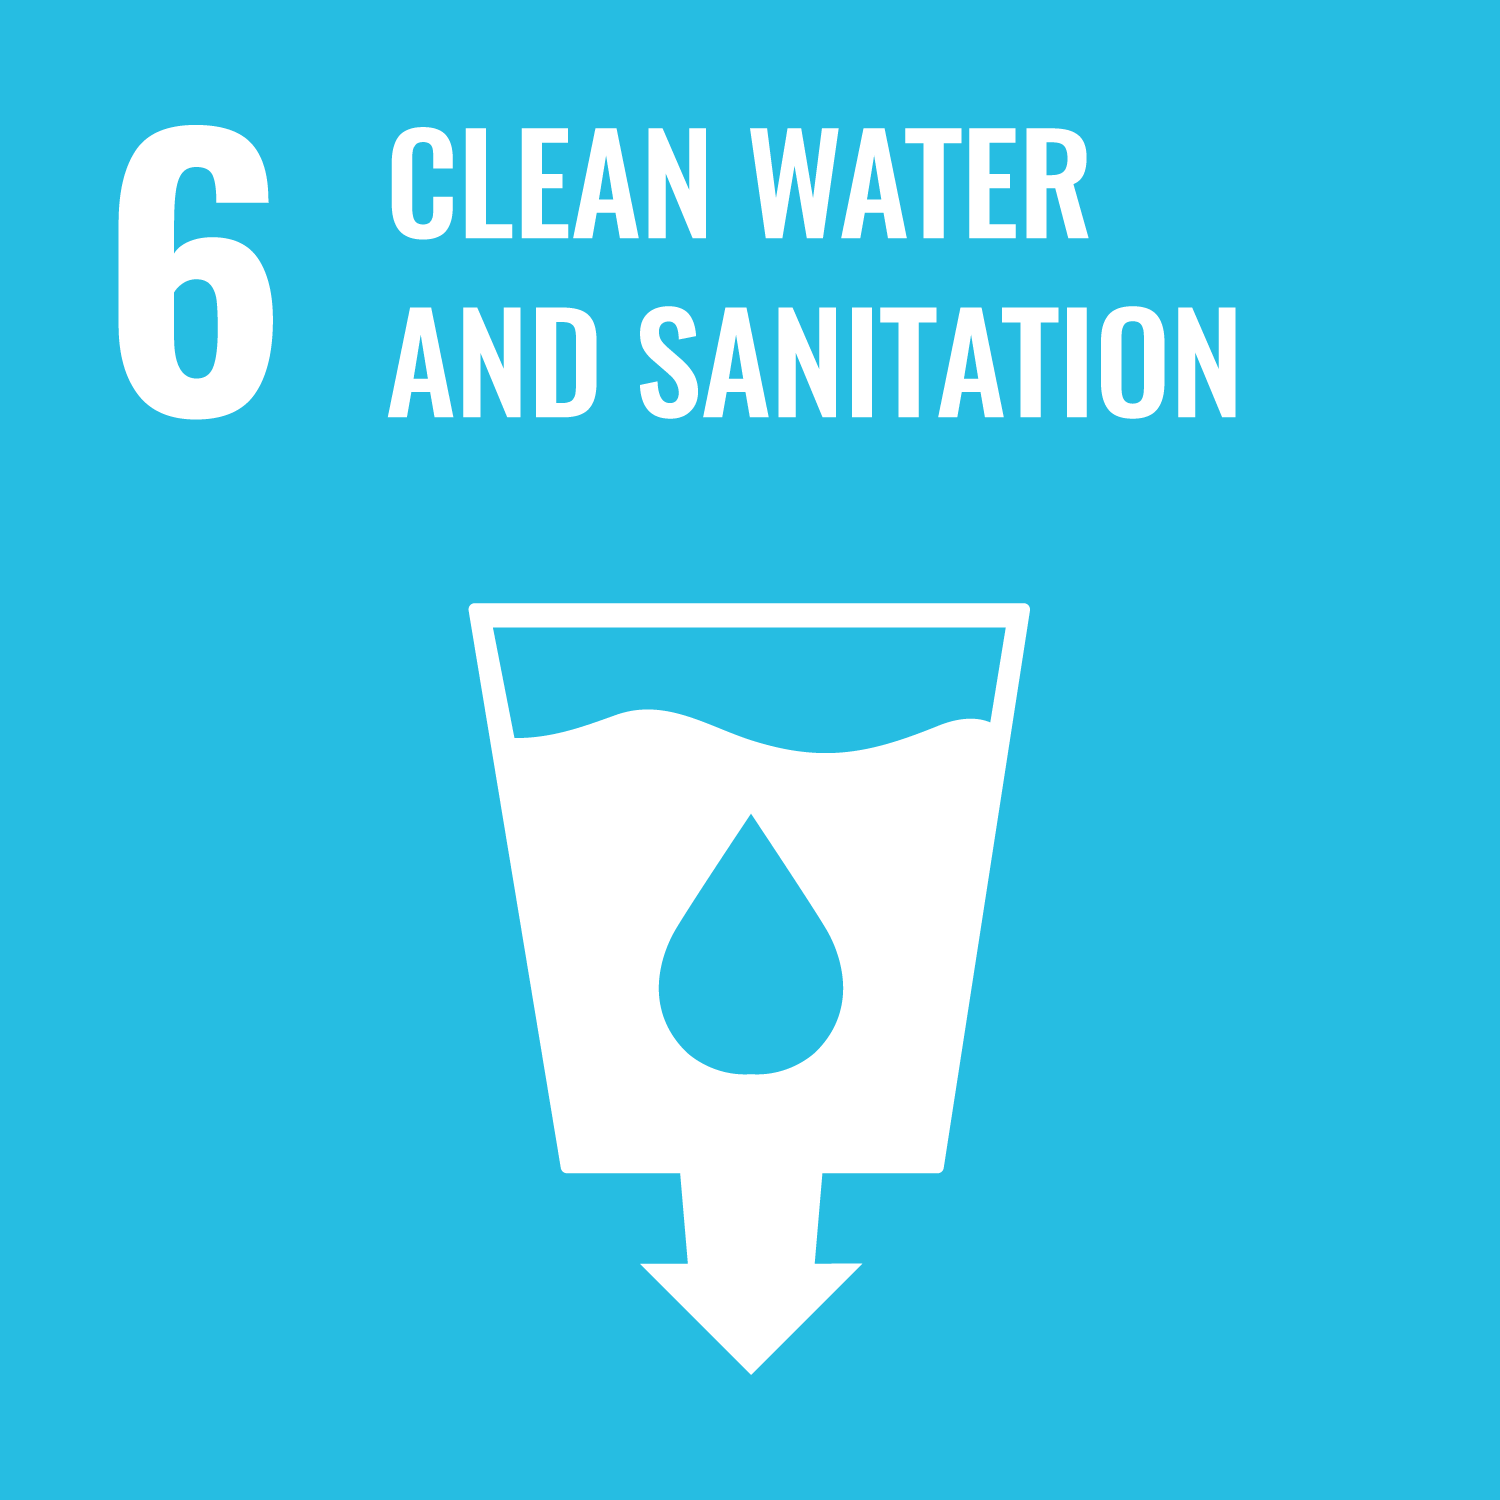 ¥Clean Water and Sanitation